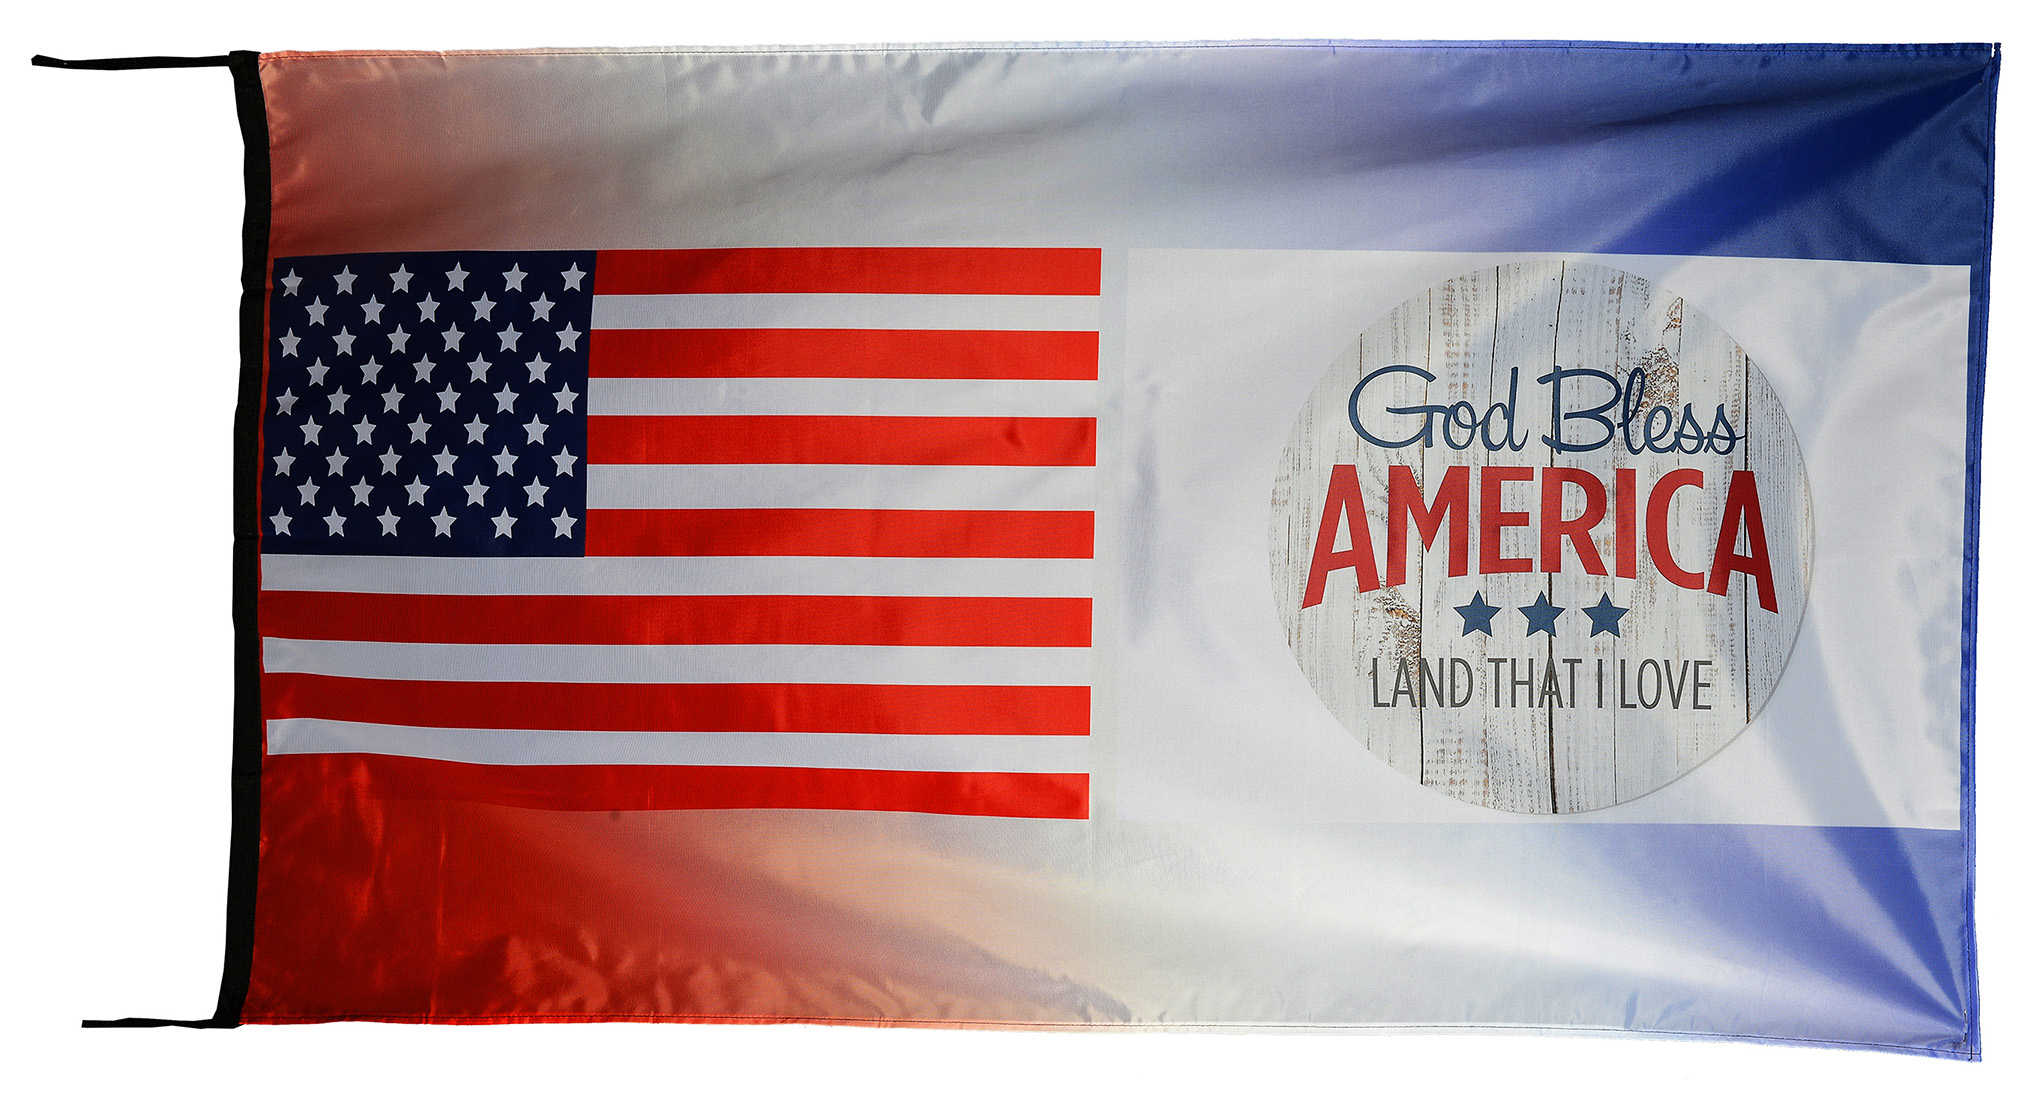 Flag  138 USA / US Country / United States Of America and God Bless America / Patriotic / Pride Hybrid Weather-Resistant Polyester Outdoor Flag Landscape Banner / Vivid Colors / 3 X 5 FT (150 x 90cm) International Flags for Sale